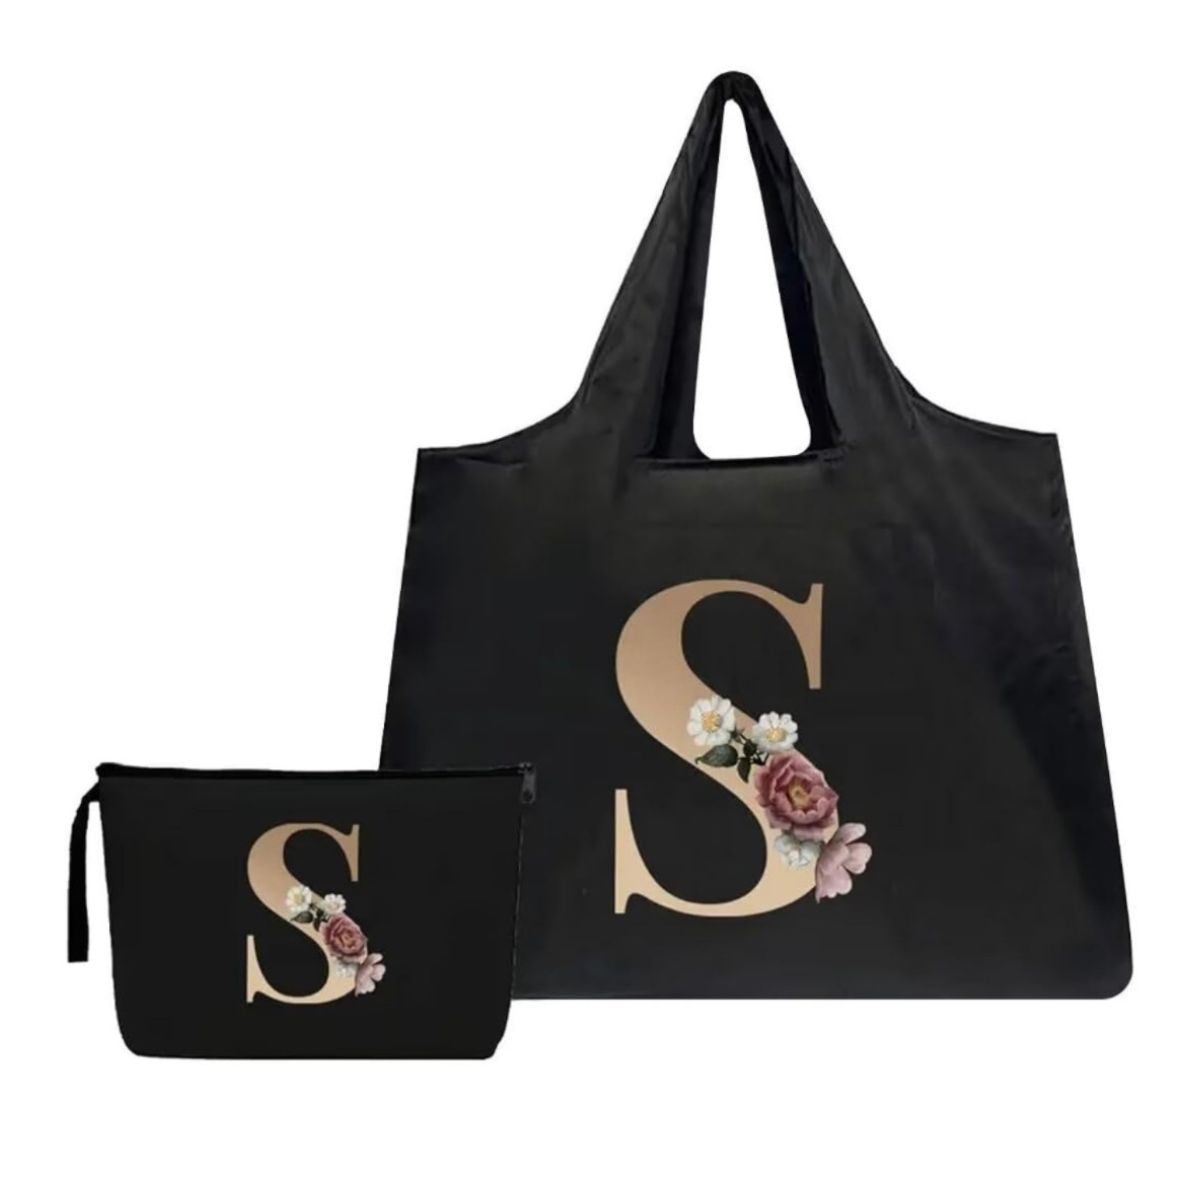 Foldable & Canvas Initial Tote Bags $6-$8+ | Smart Savers